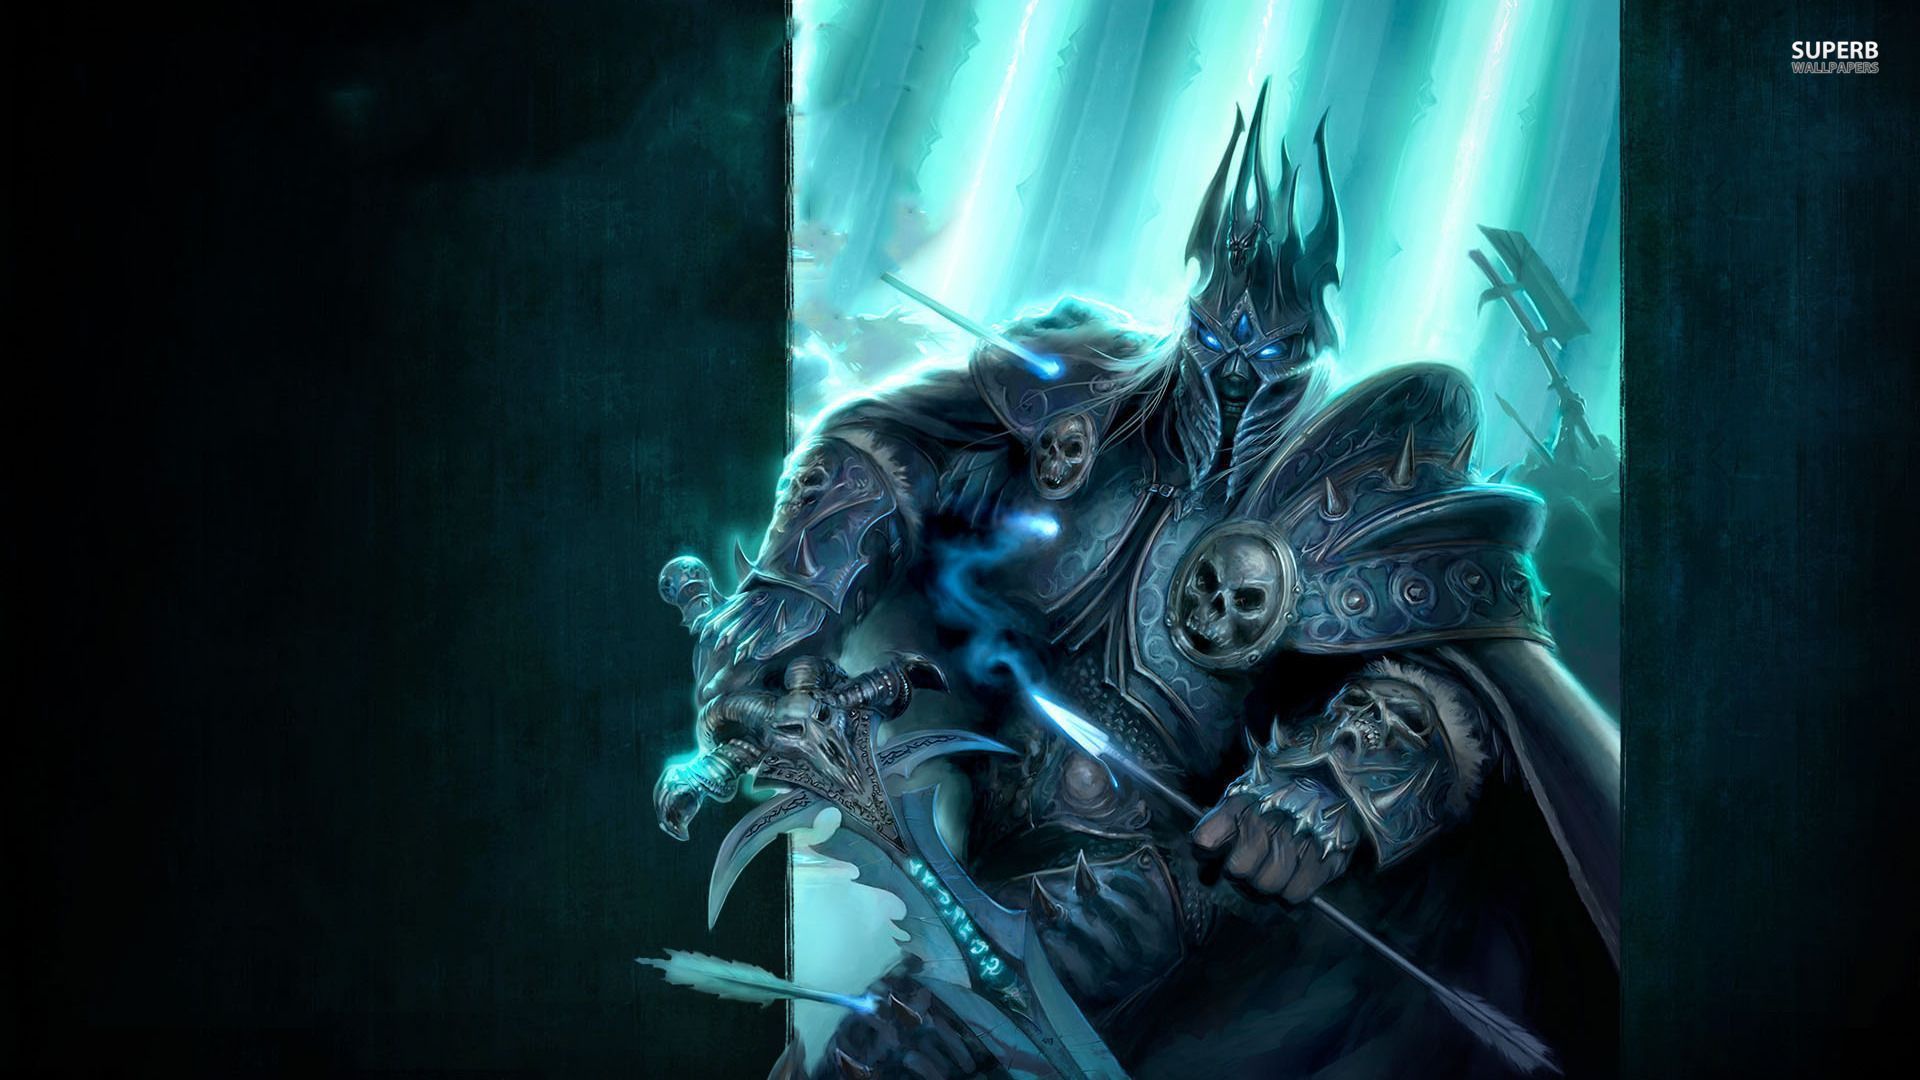 World of Warcraft Wrath of the Lich King wallpaper - Game